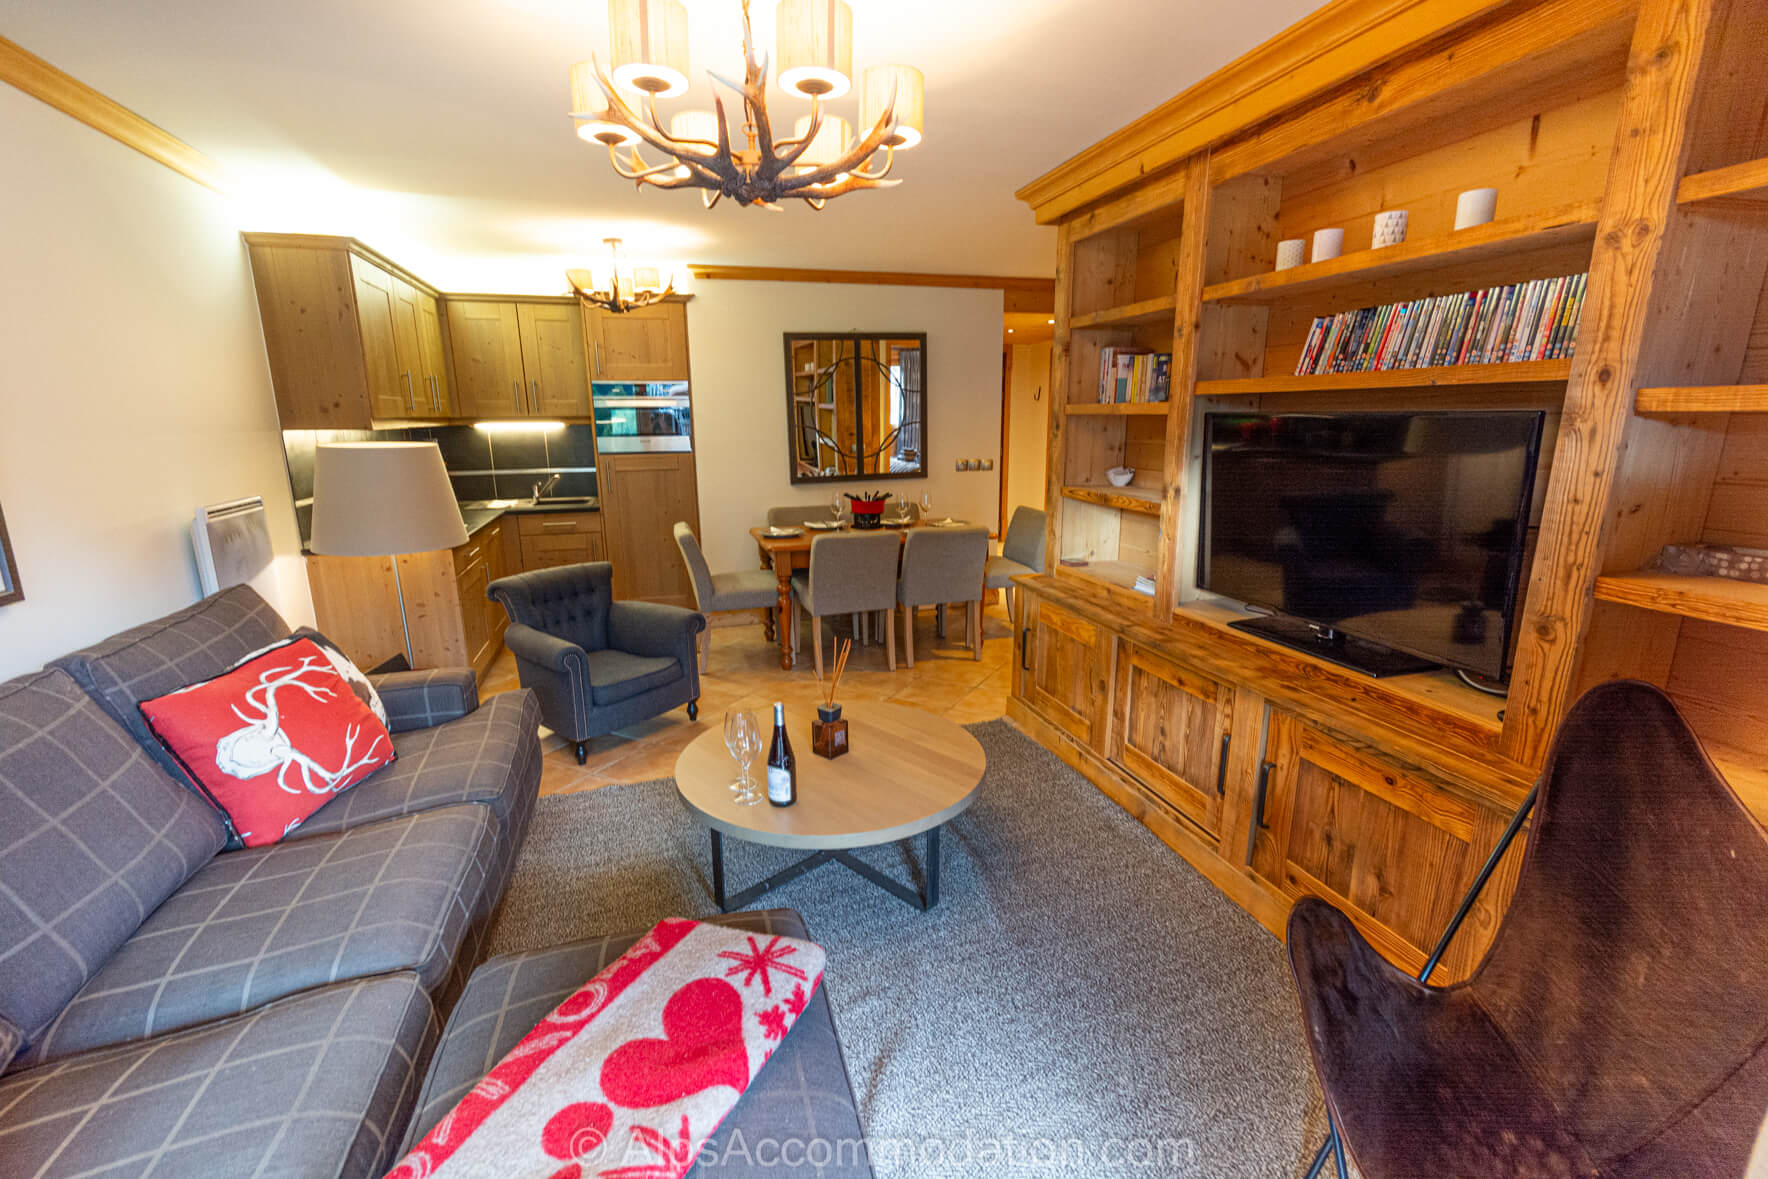 Chardons Argentes G6 Samoëns - Entertainment is provided by a smart TV and Wi-Fi